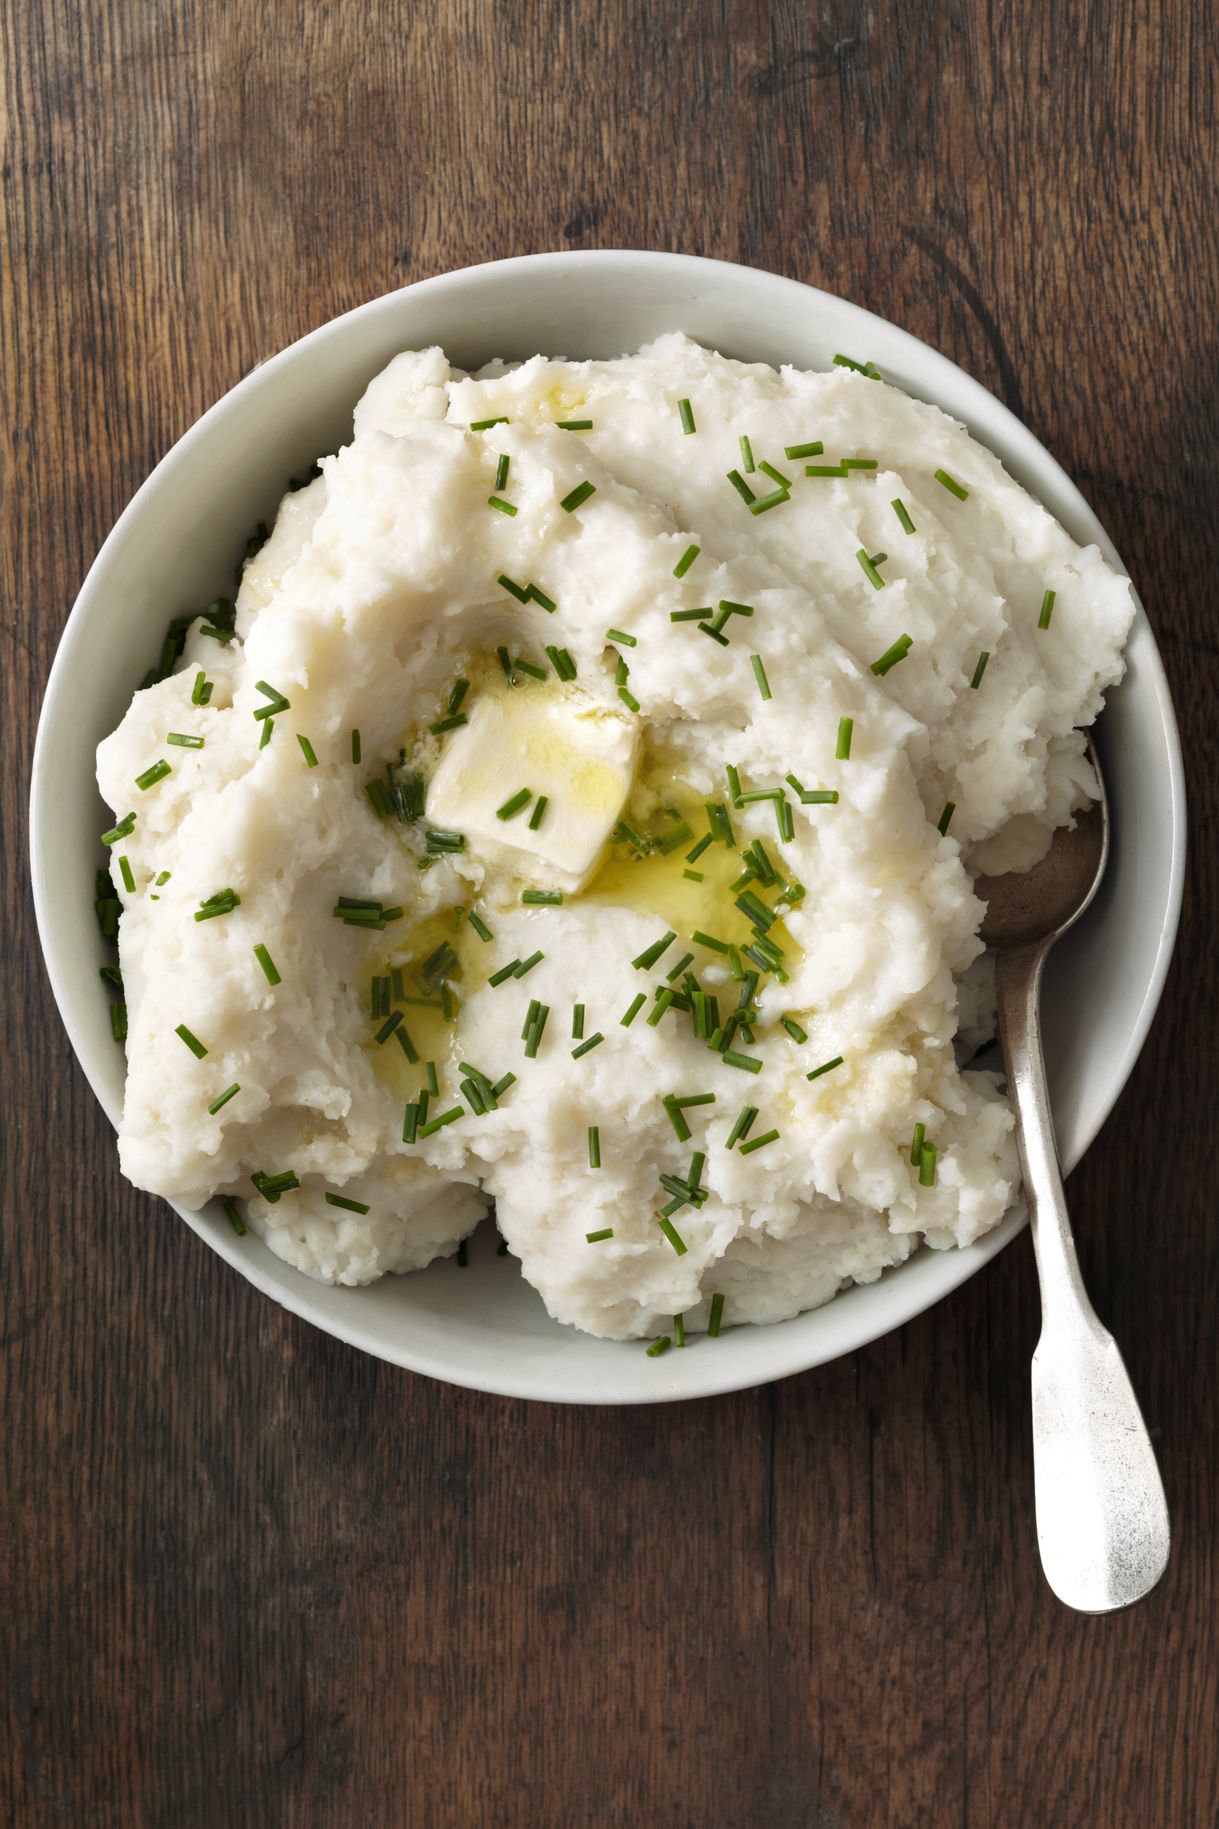 https://hips.hearstapps.com/goodhousekeeping/assets/17/35/1503938025-classic-mashed-potatoes.jpg